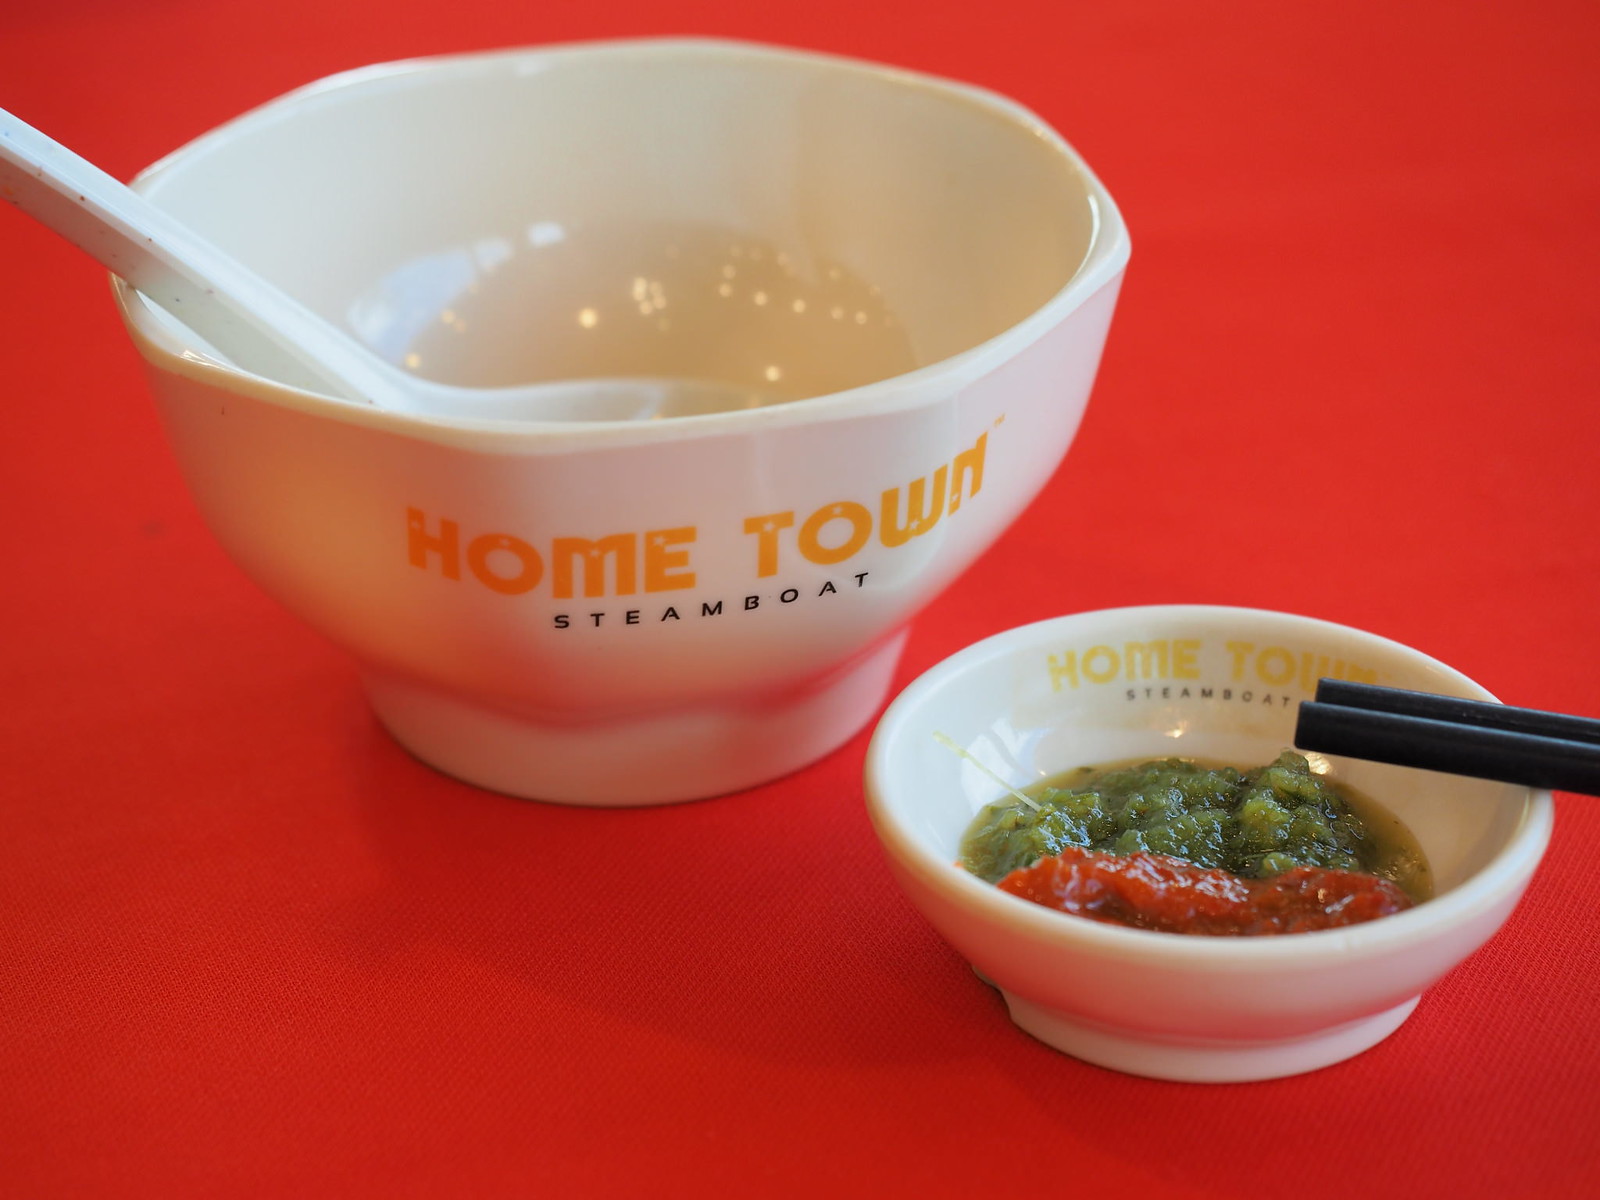 The bowl and the chili sauce for the steamboat